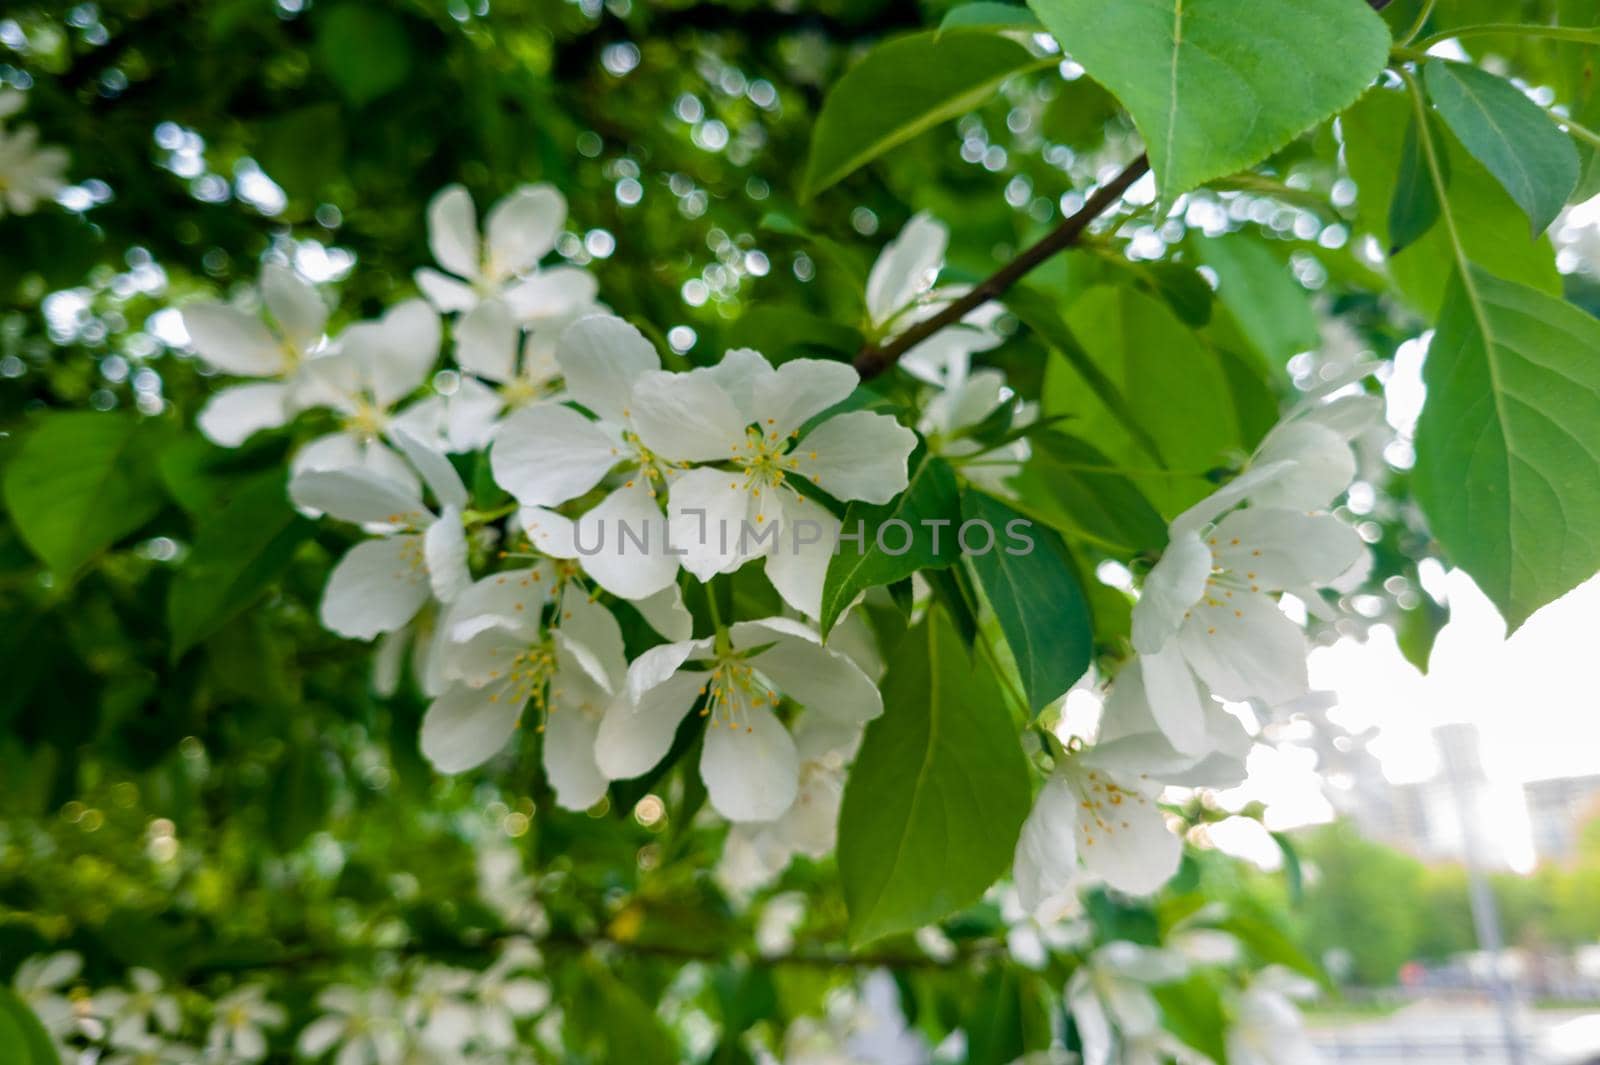 White Apple Flowers. Beautiful flowering apple trees. Background with blooming flowers in spring day.